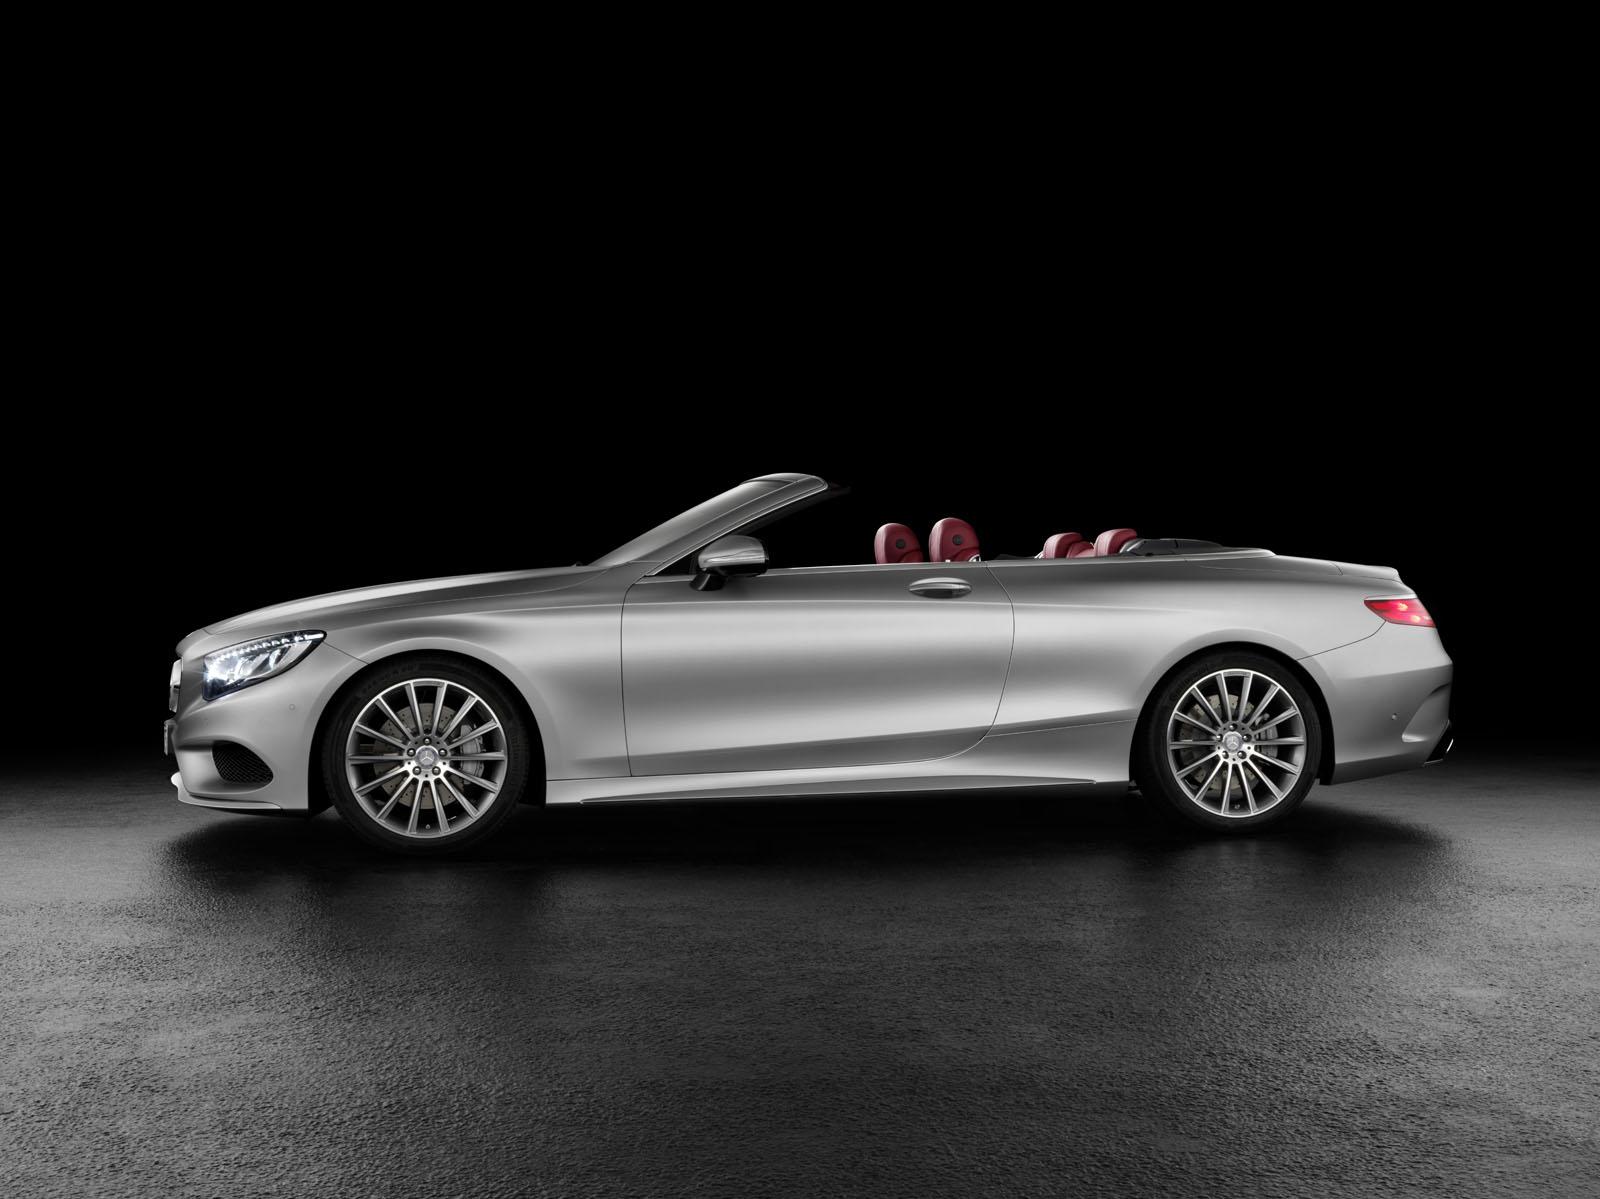 2016 MERCEDES S SERS CABRO RESM GALERS